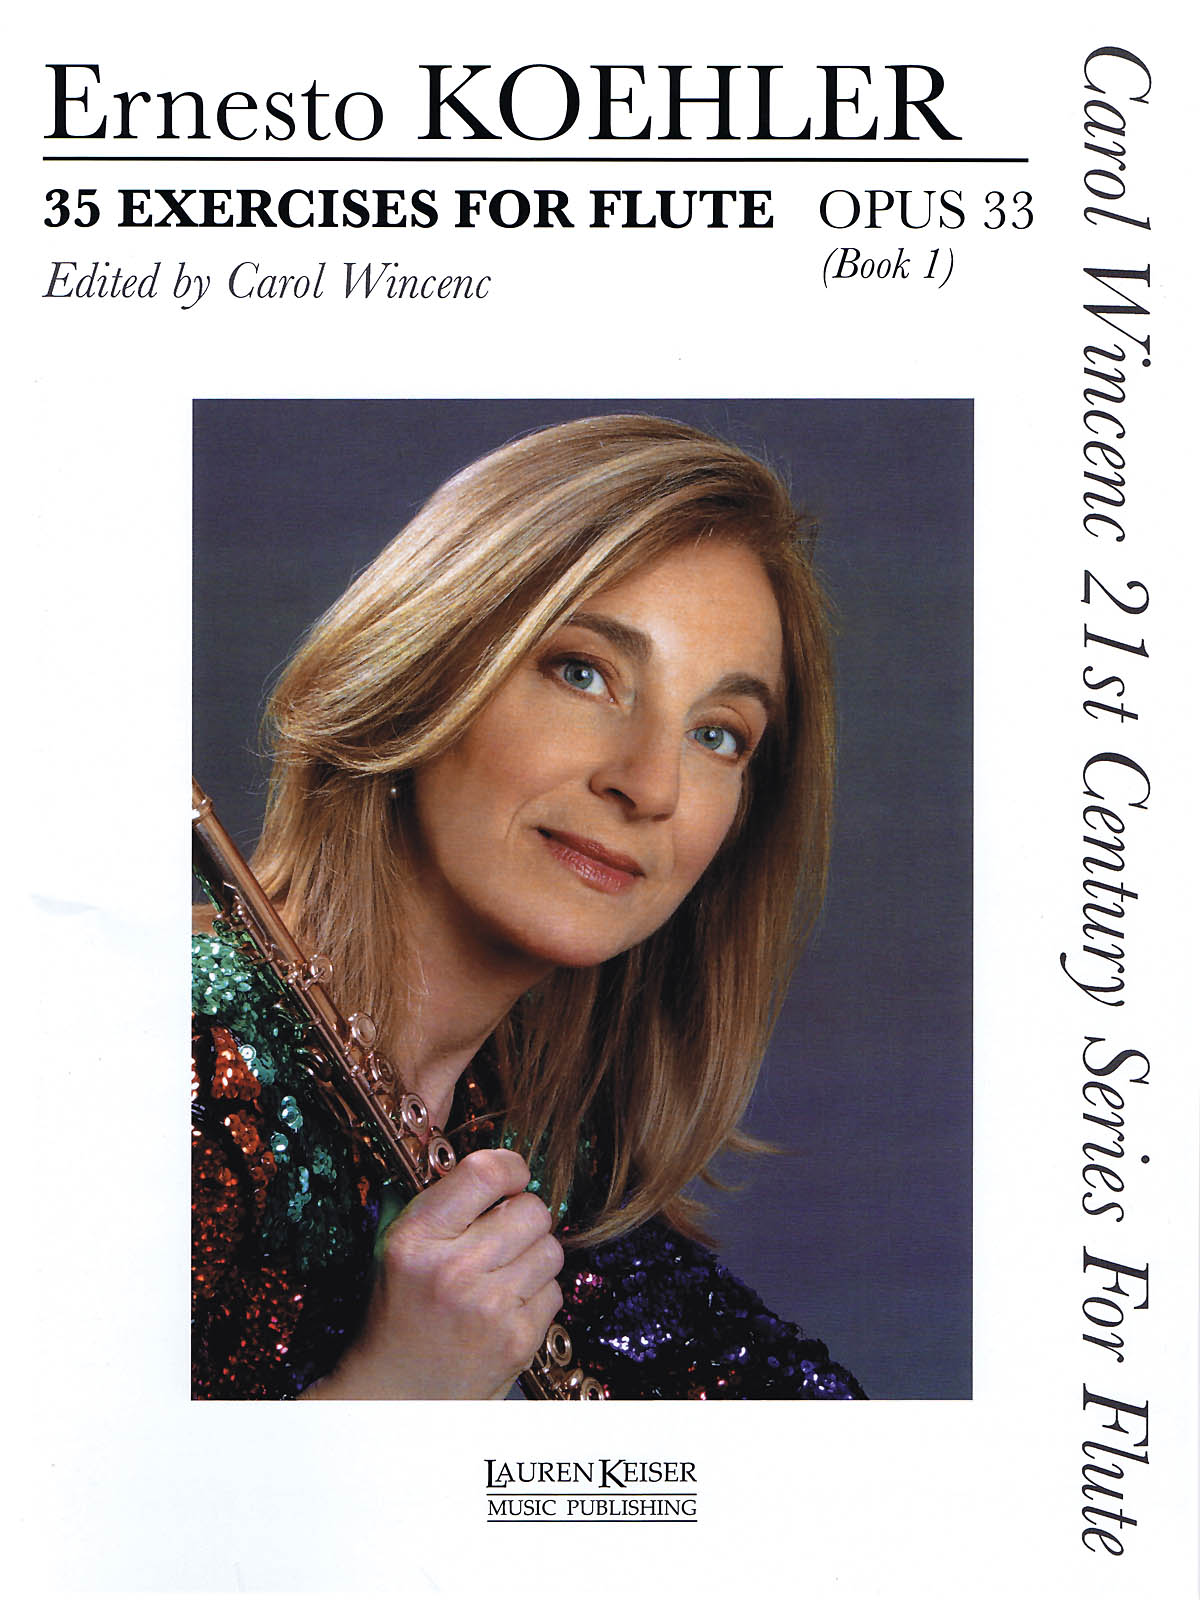 35 Excersises for Flute, Op. 33